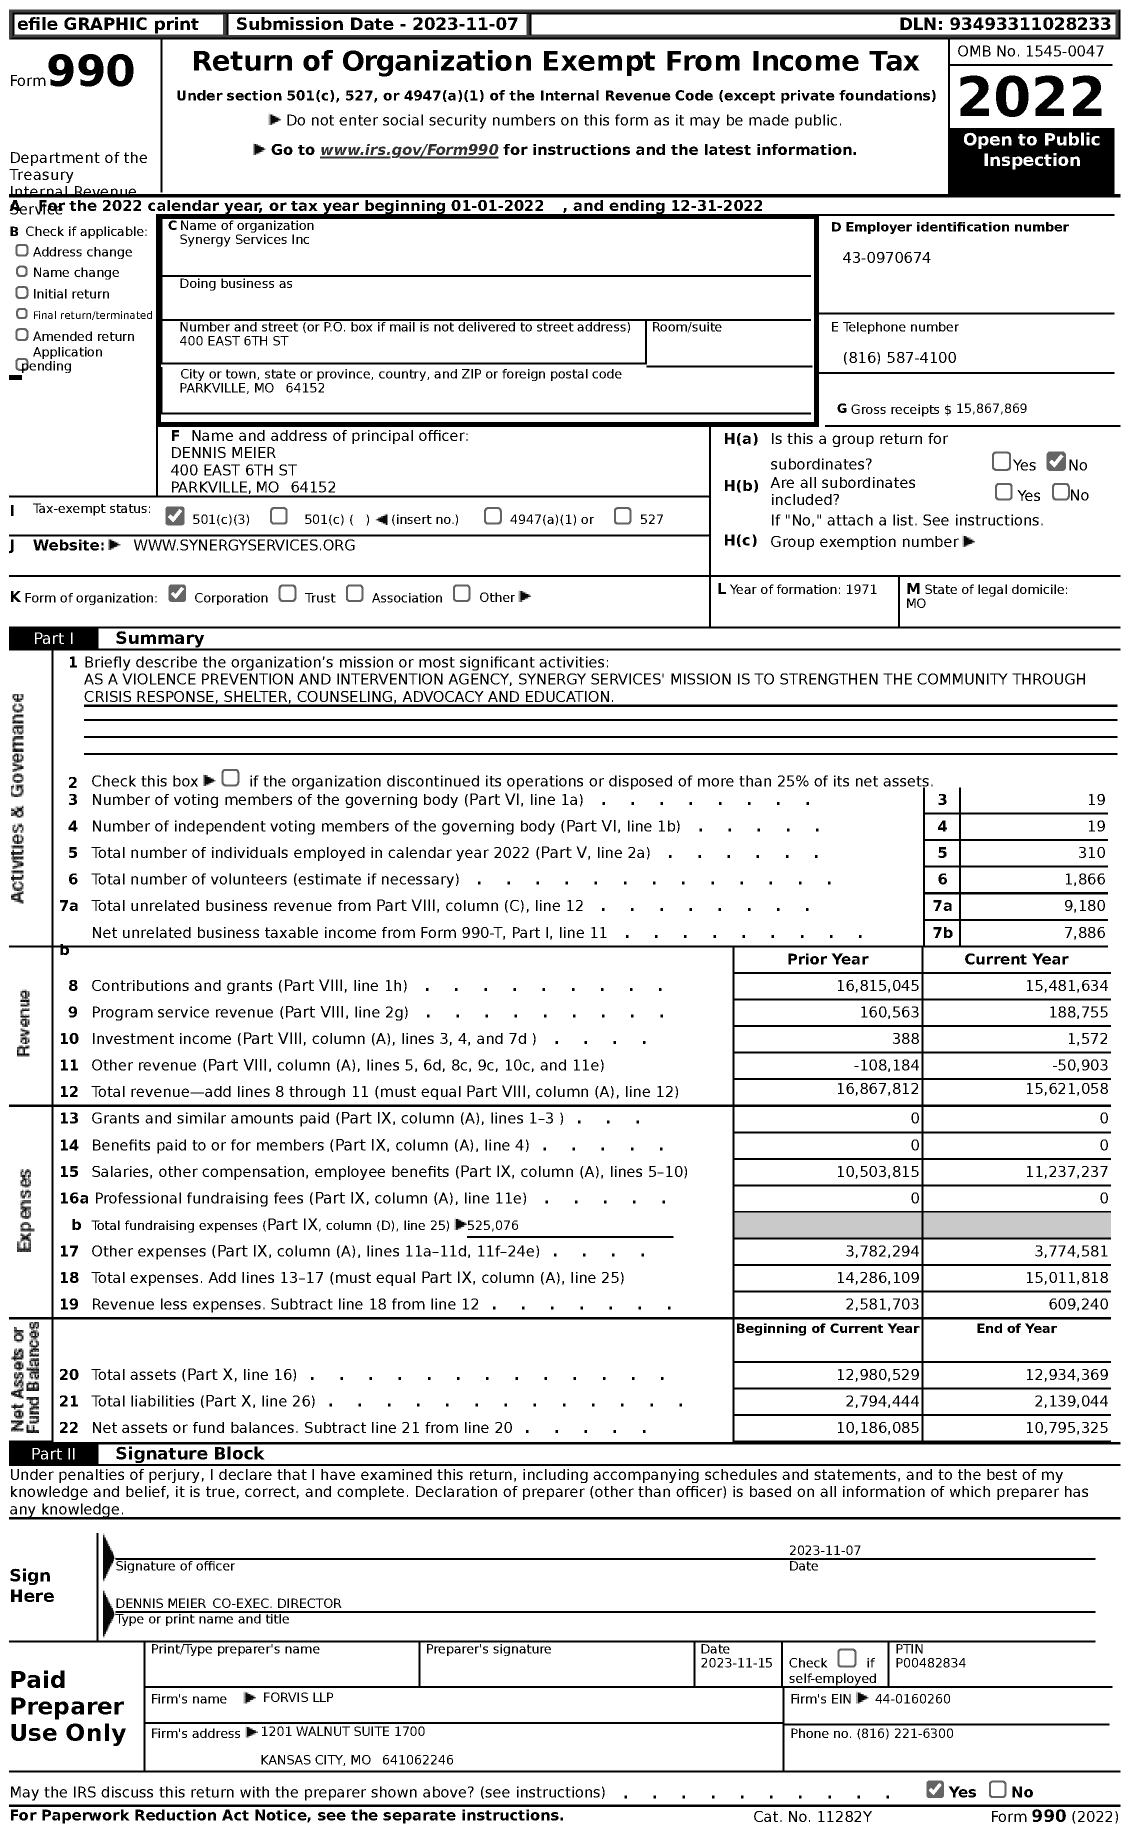 Image of first page of 2022 Form 990 for Synergy Services